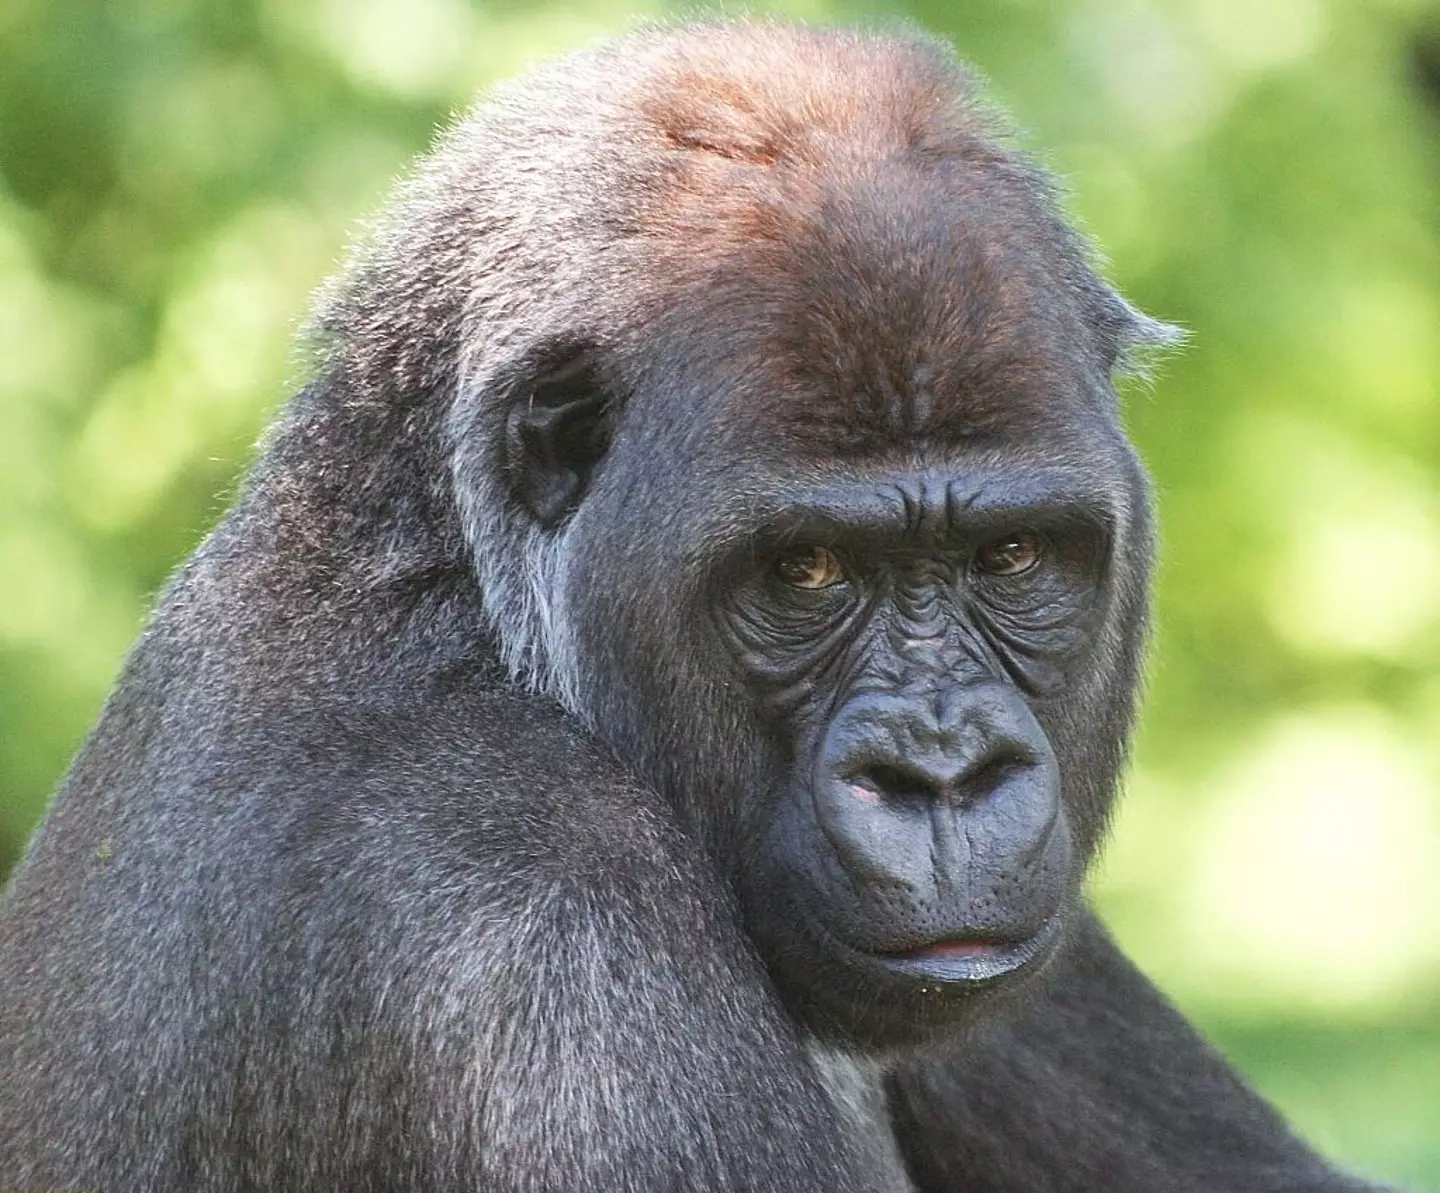 There's a terrifying reason why you should never smile at a gorilla in a zoo. (ullstein bild / Contributor / Getty Images)